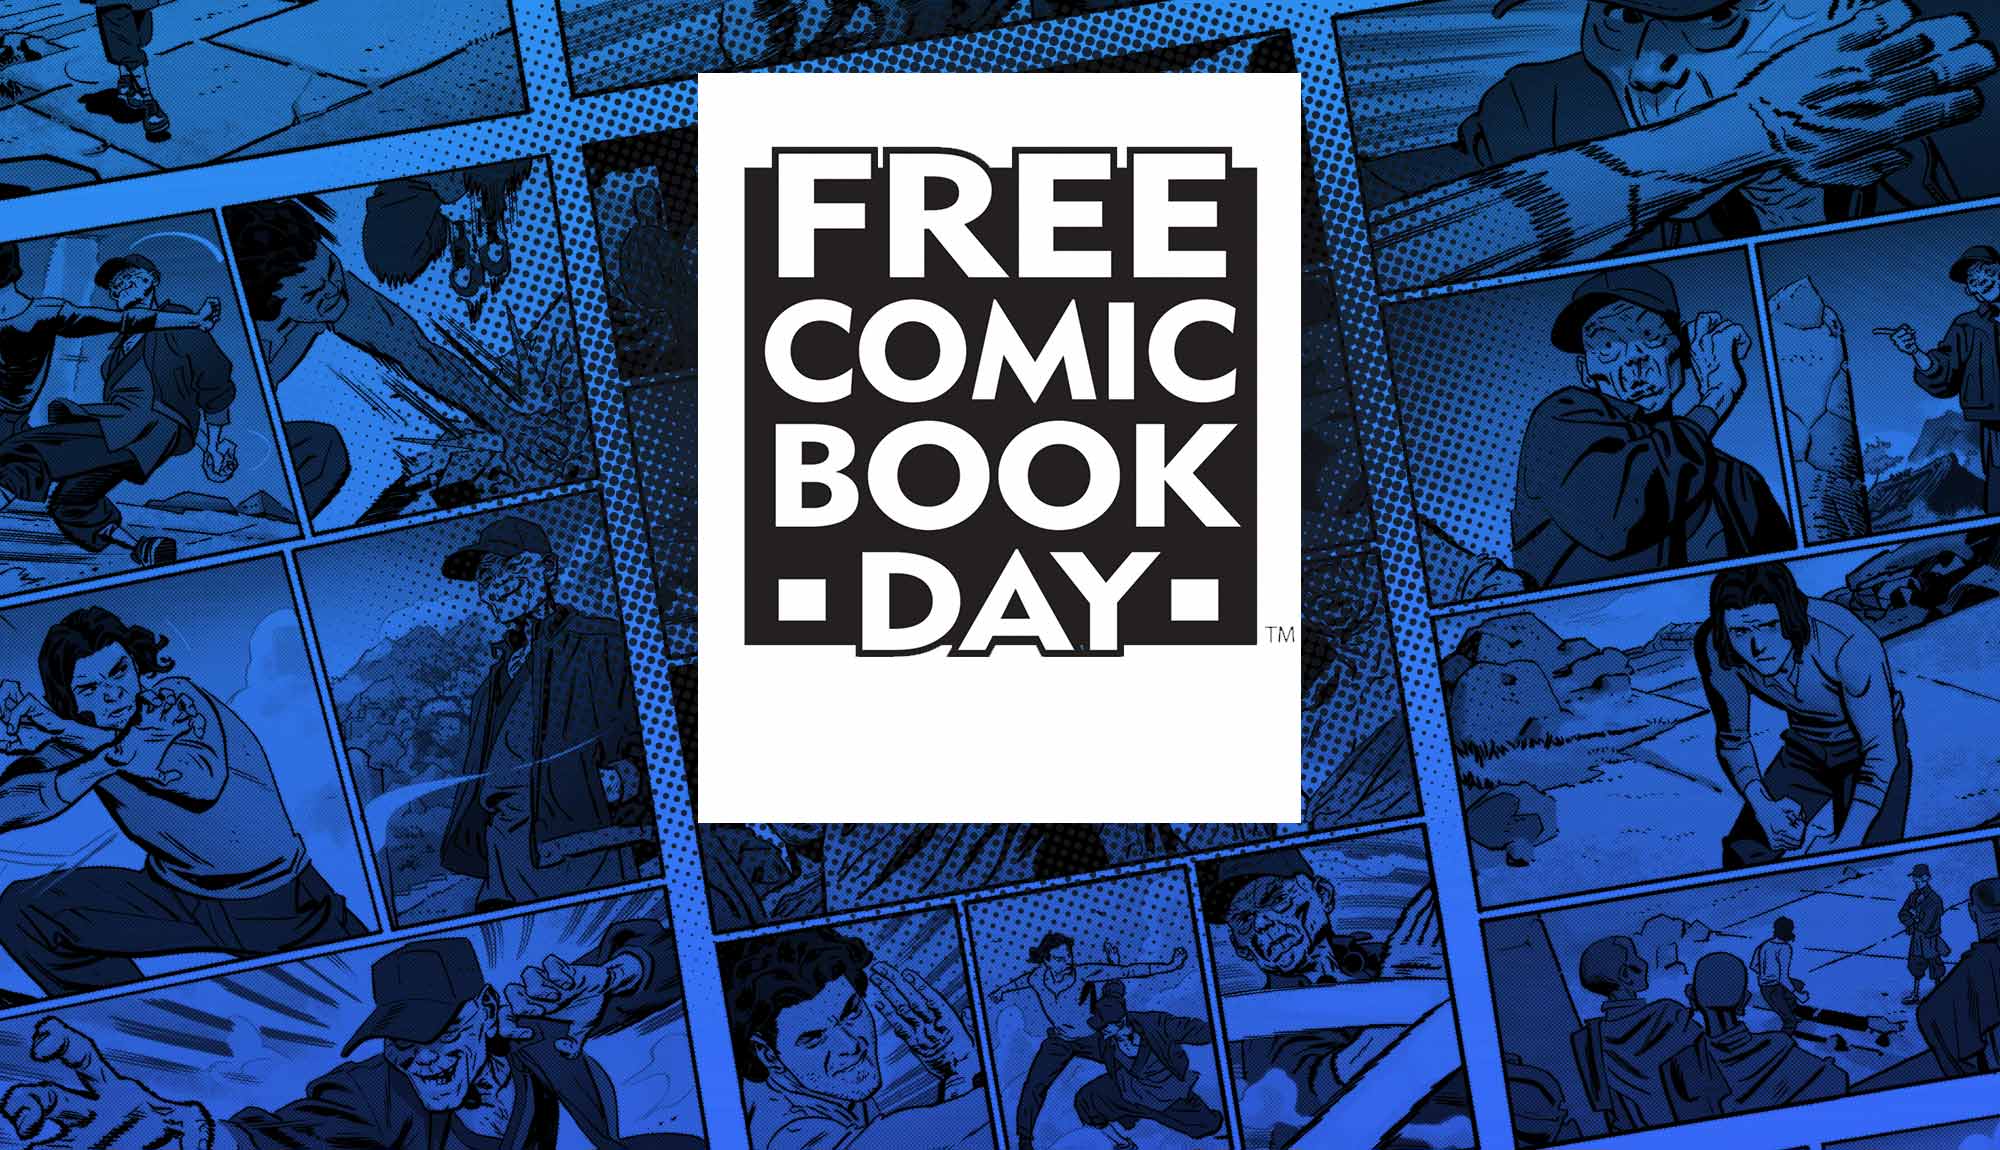 Free Comic Book Day Gets Some FIRE POWER